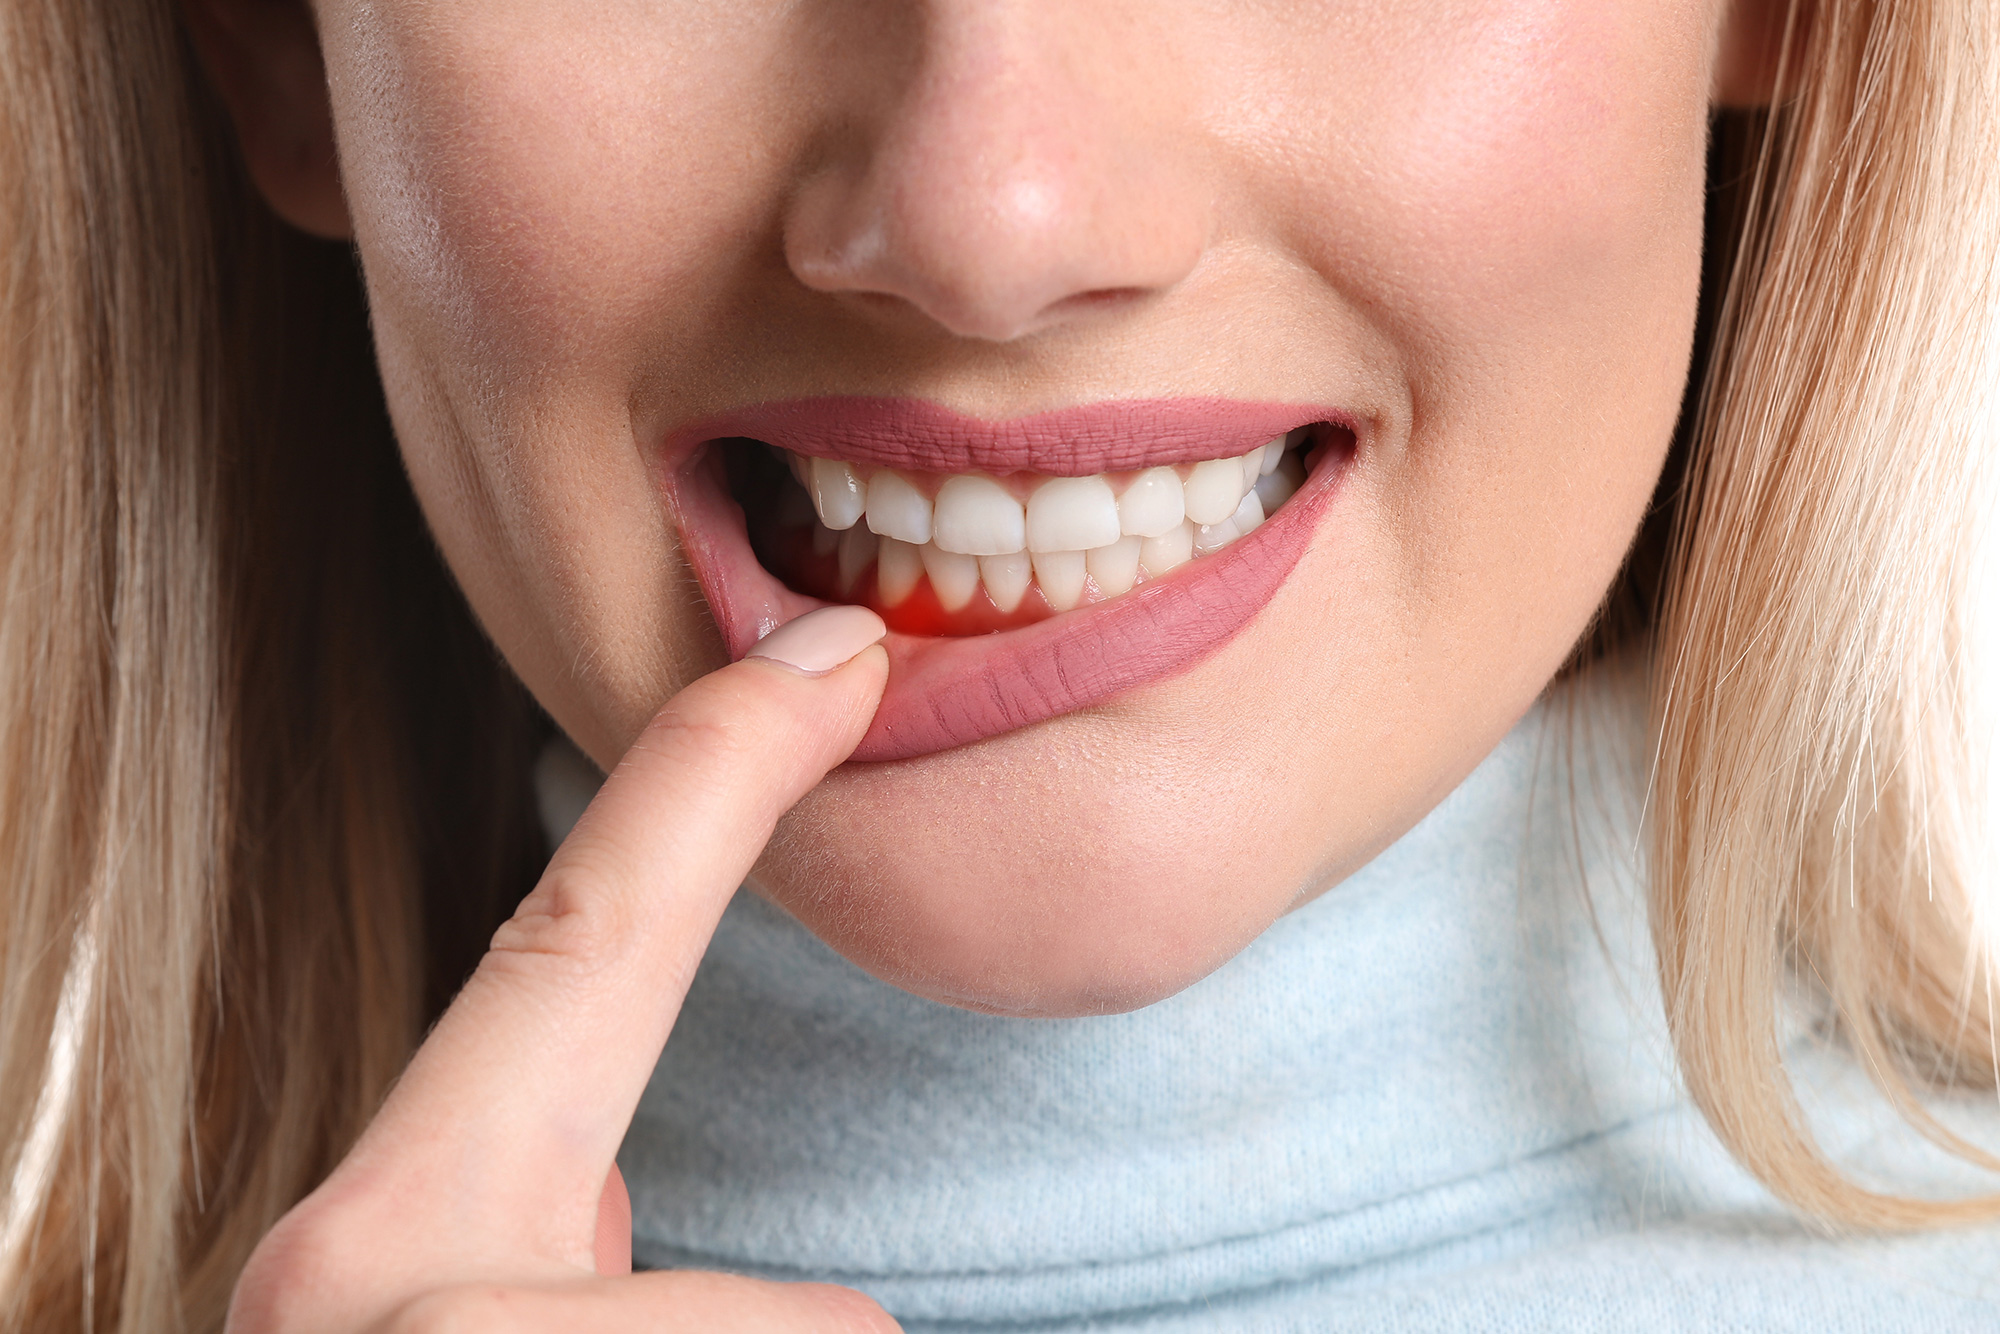 How to Prevent and Treat Bleeding Gums